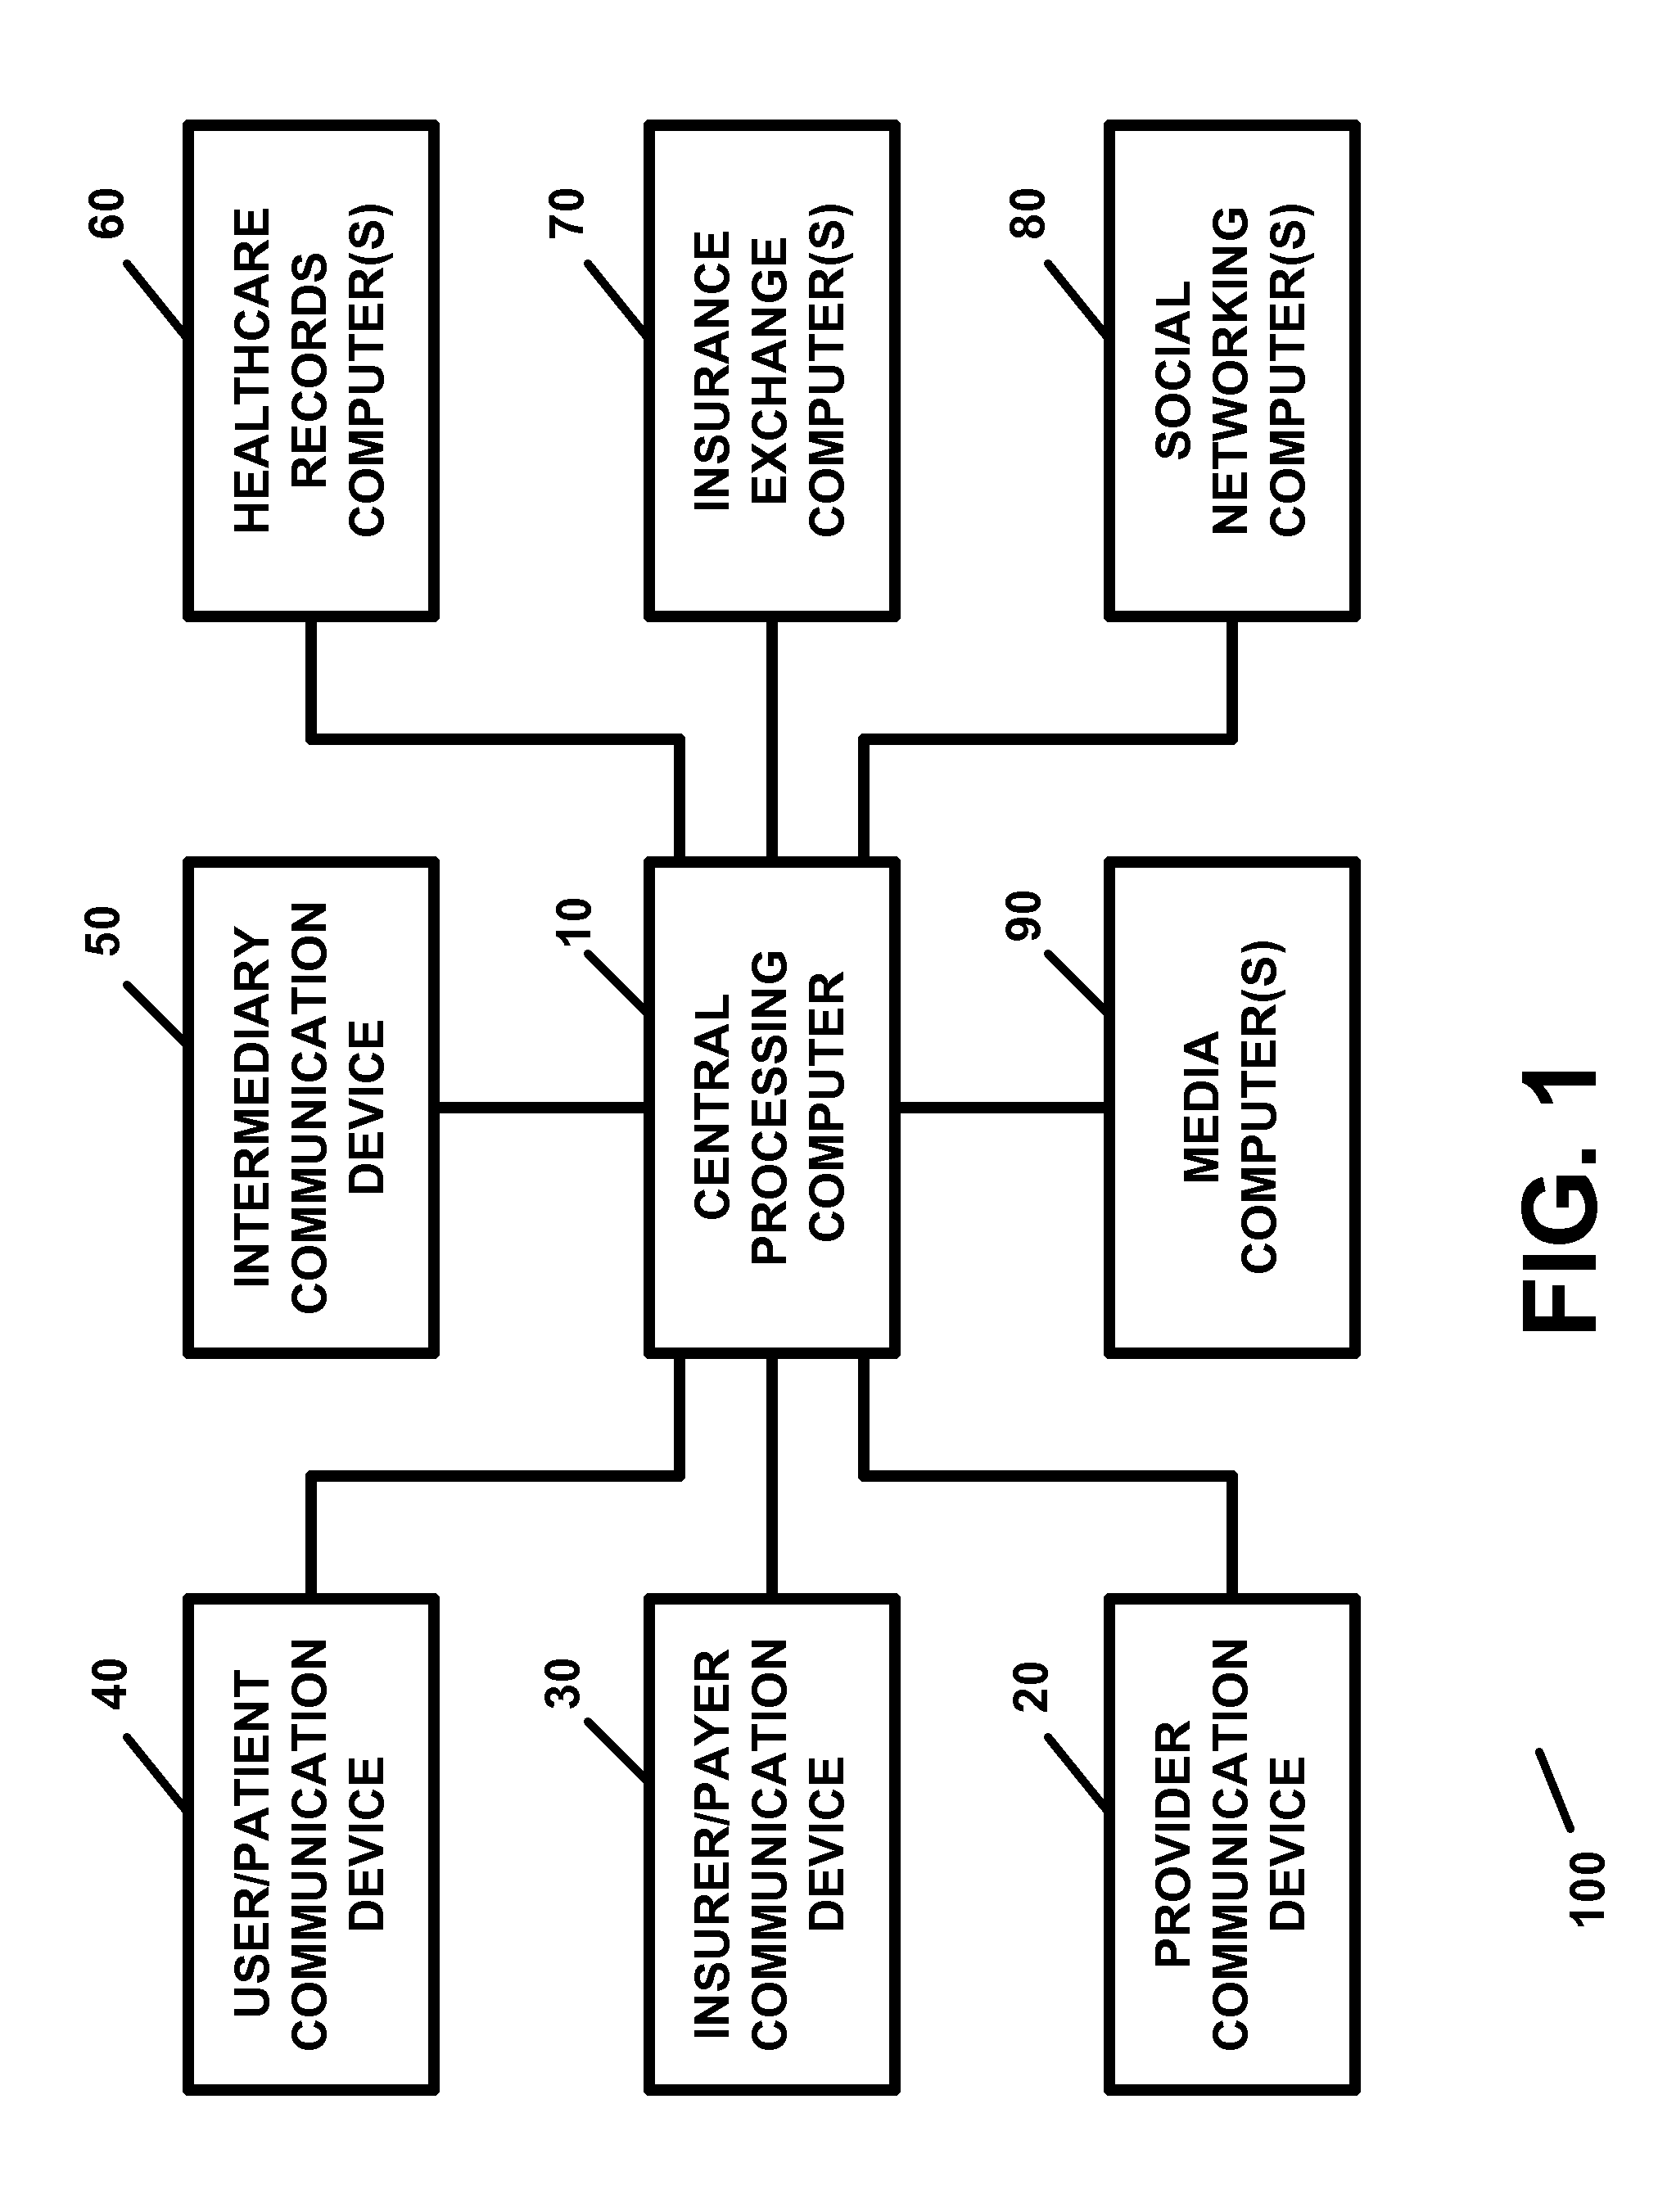 Apparatus and method for providing healthcare services remotely or virtually with or using an electronic healthcare record and/or a communication network